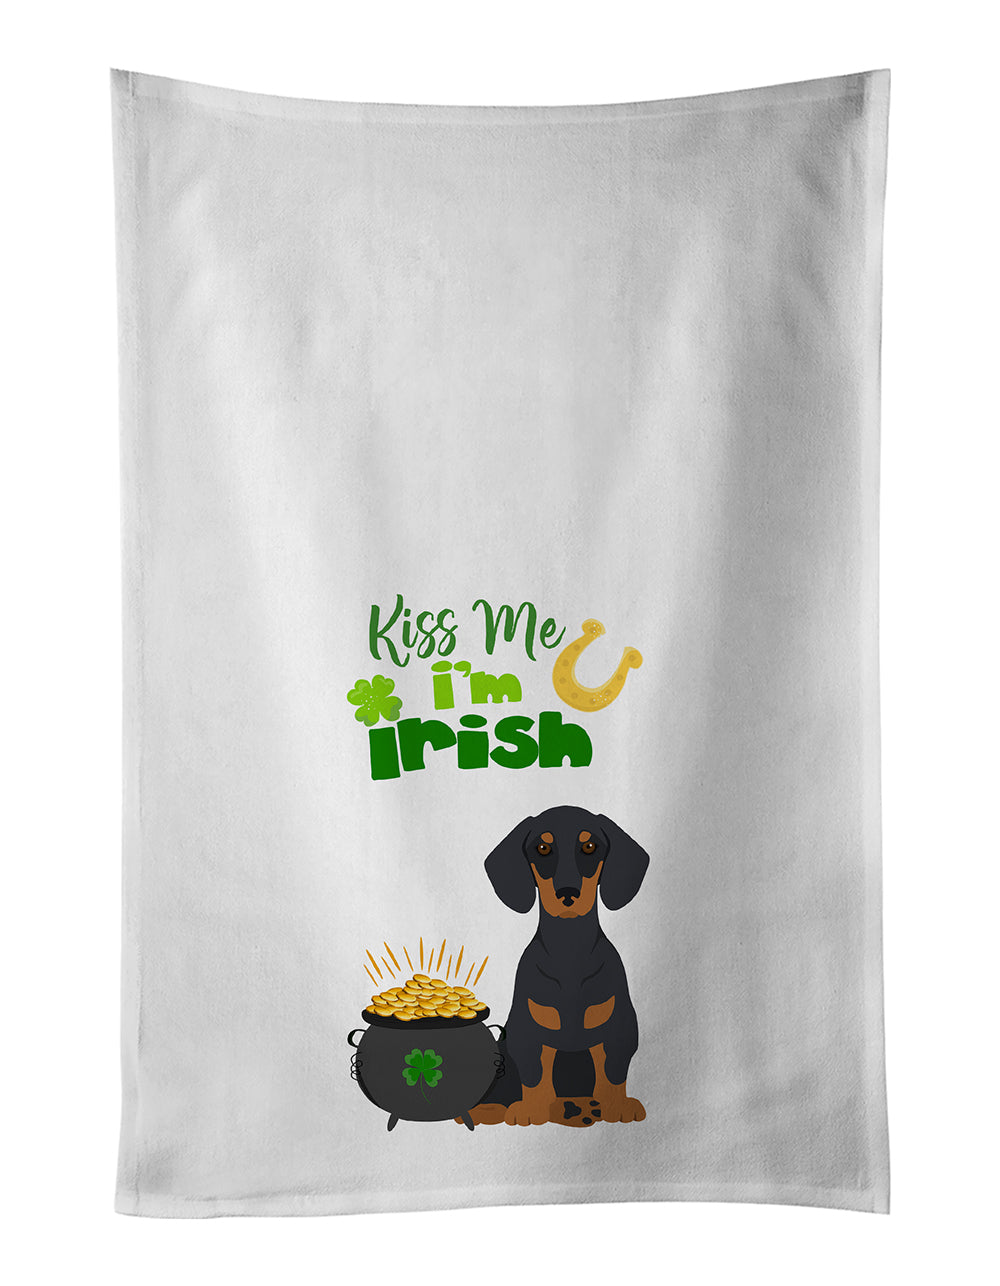 Buy this Black and Tan Dachshund St. Patrick's Day White Kitchen Towel Set of 2 Dish Towels